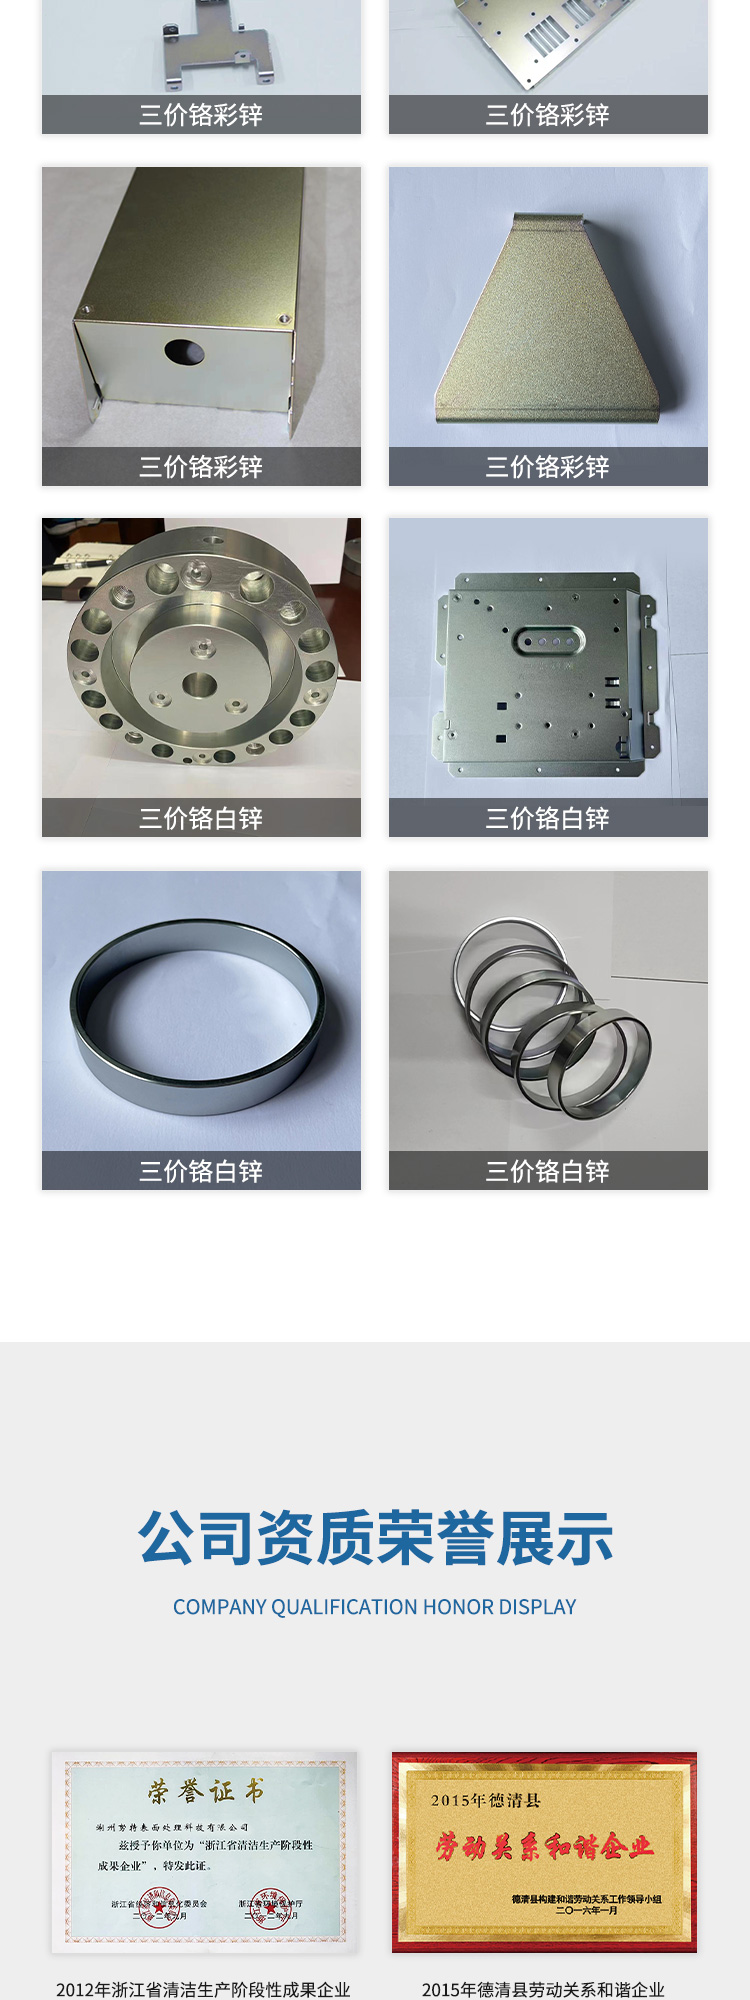 NUT Sheet Metal White Zinc Plating Factory Advanced Technology, Reliable Quality Assurance